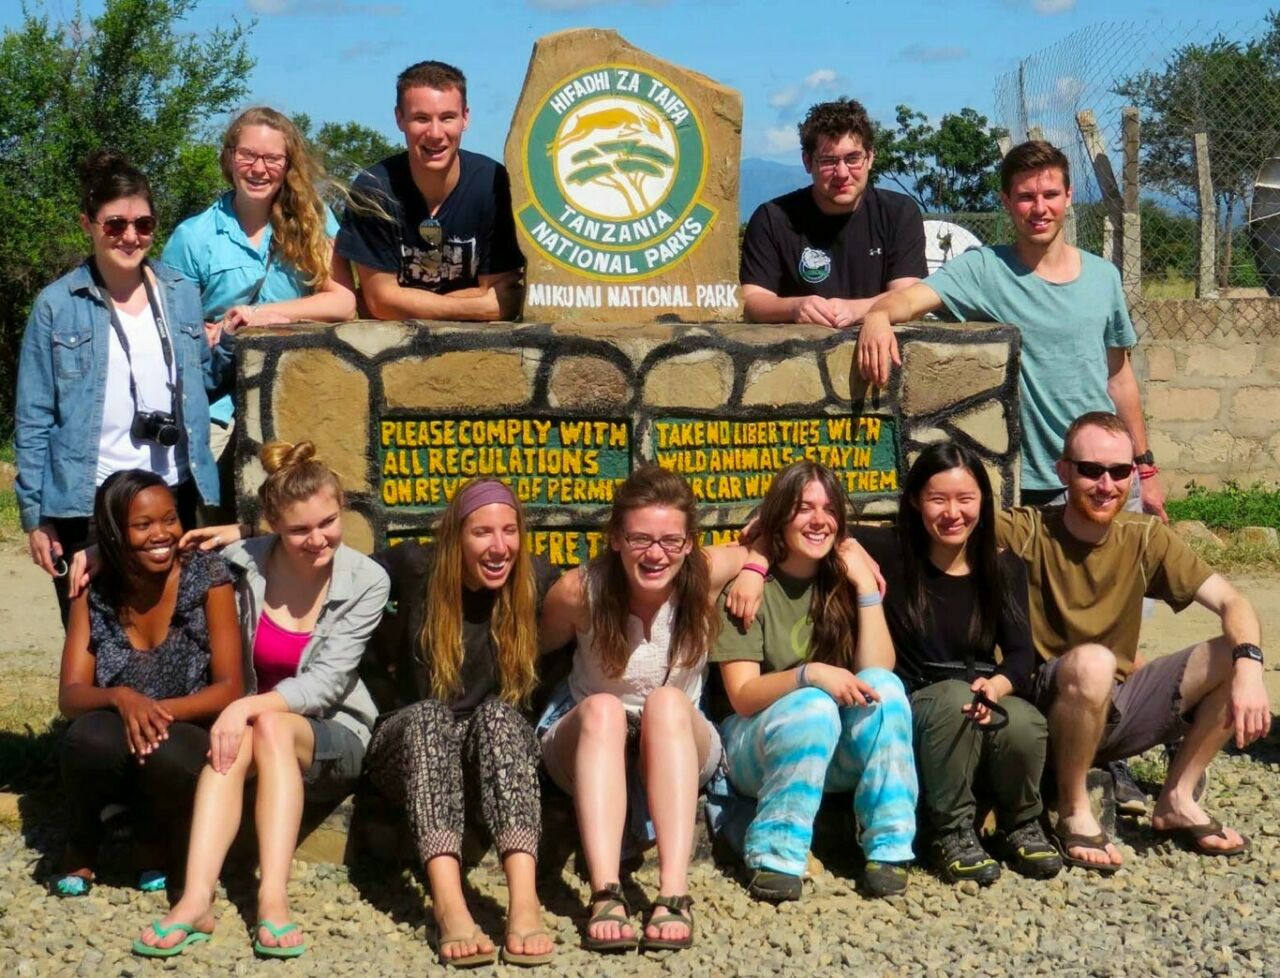 Penn State landscape architecture students grouped around a Mikumi National Park sign in Tanzania